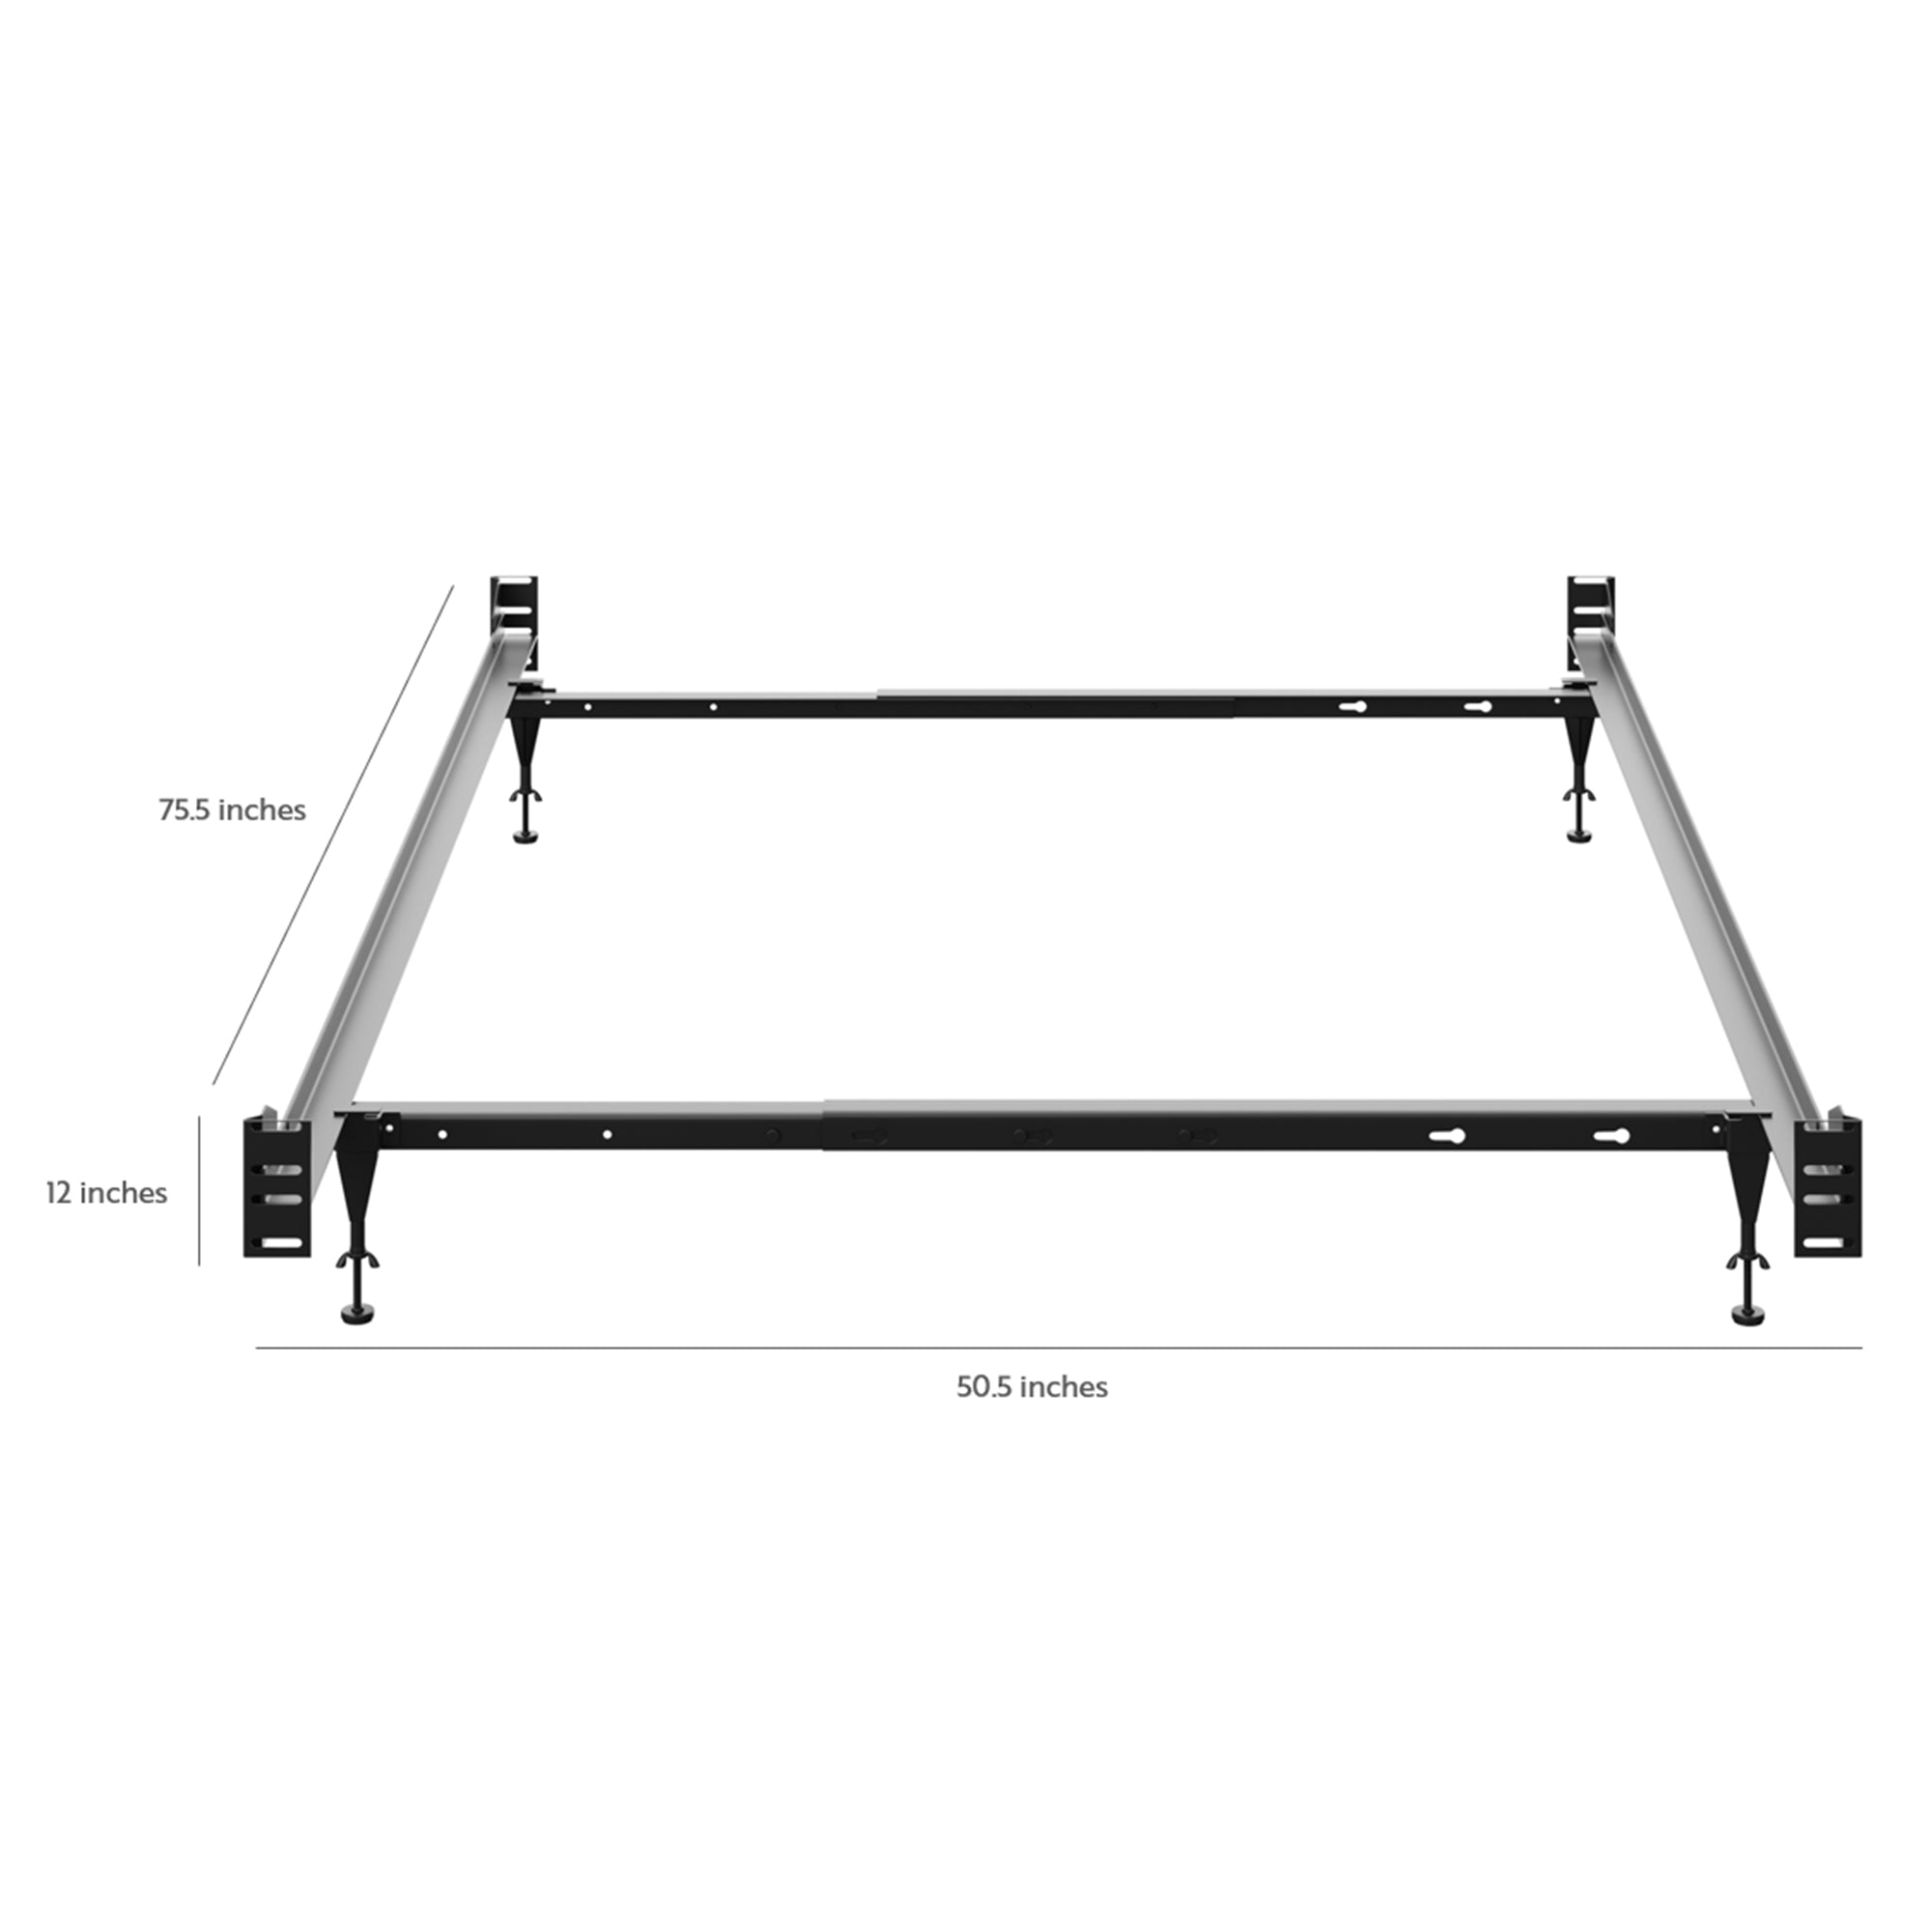 angled full-size bed metal conversion kit with dimensions